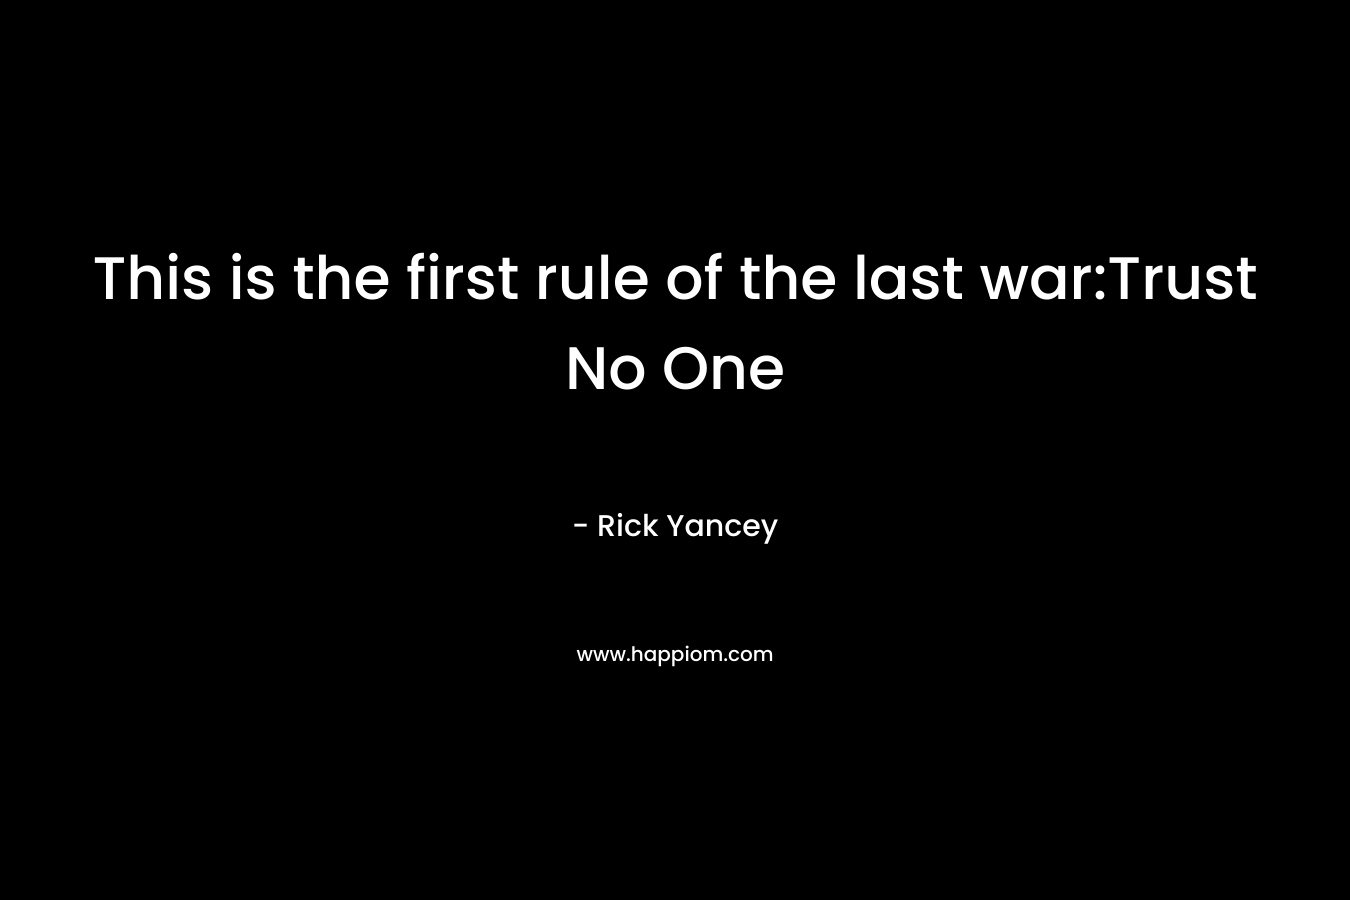 This is the first rule of the last war:Trust No One